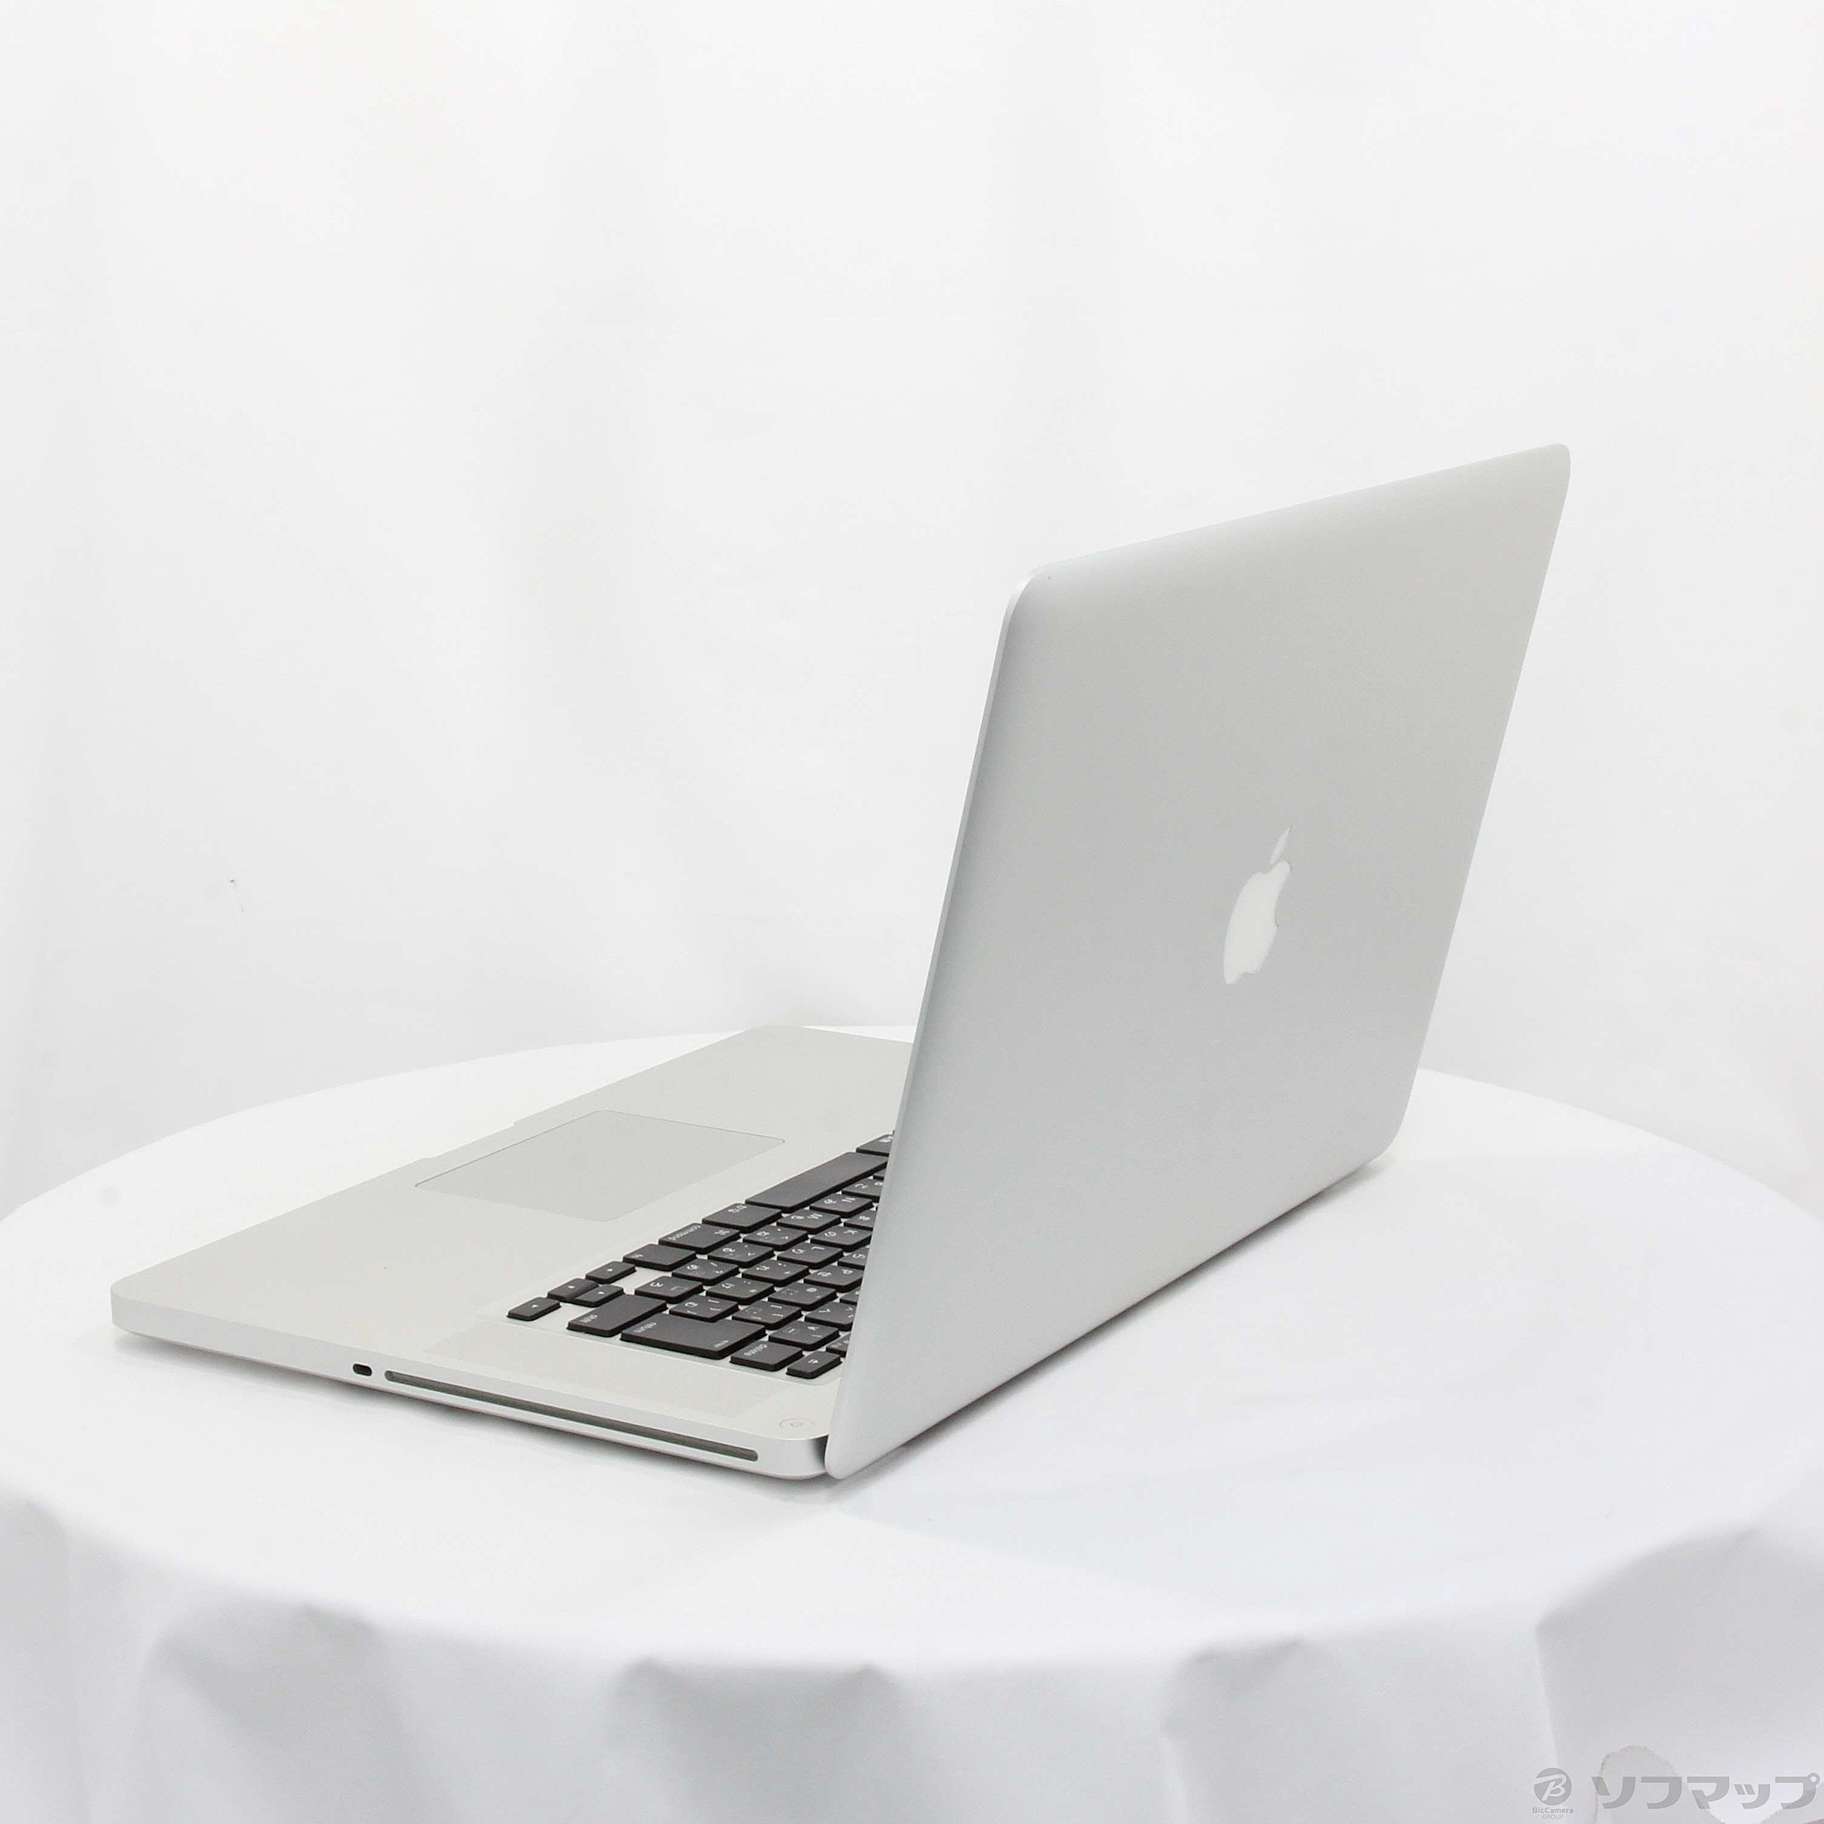 MacBook Pro 15-inch Late 2011 MD318J／A Core_i7 2.2GHz 4GB HDD500GB 〔10.13  HighSierra〕 ◇03/09(水)値下げ！